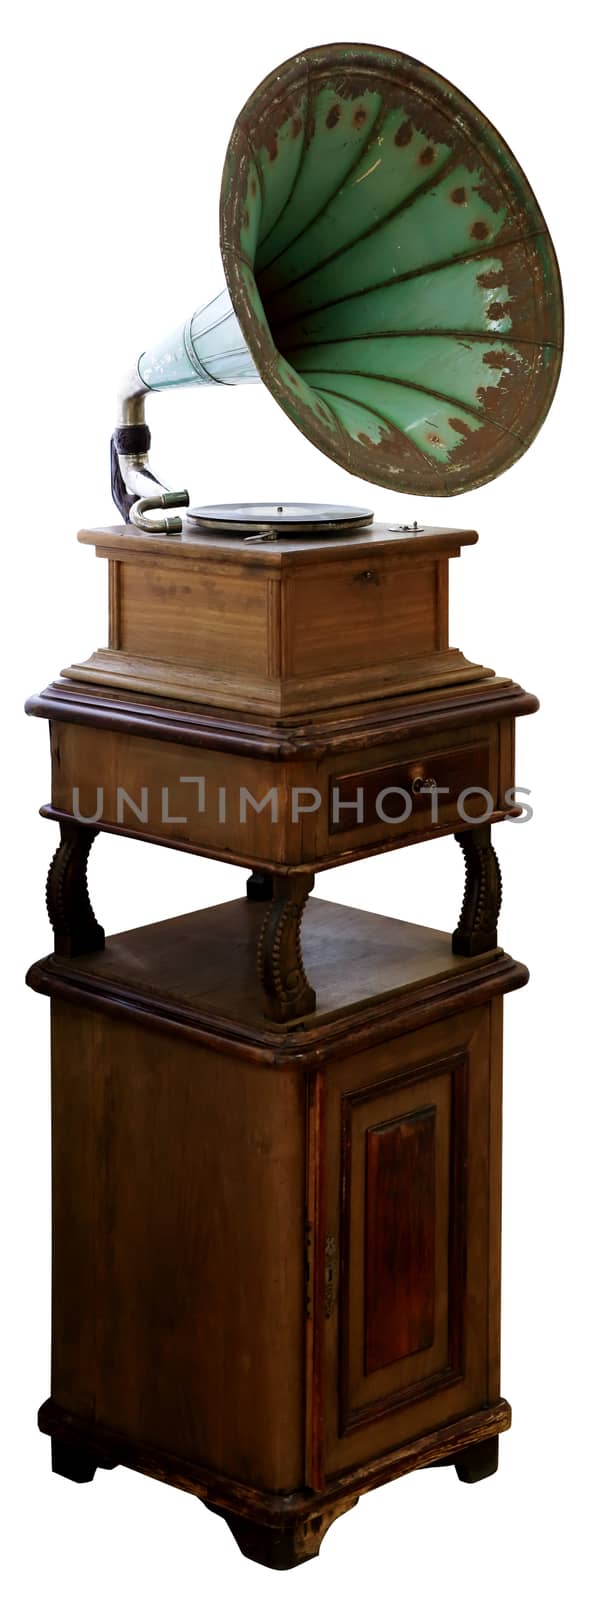 Old gramophone isolated on white background.